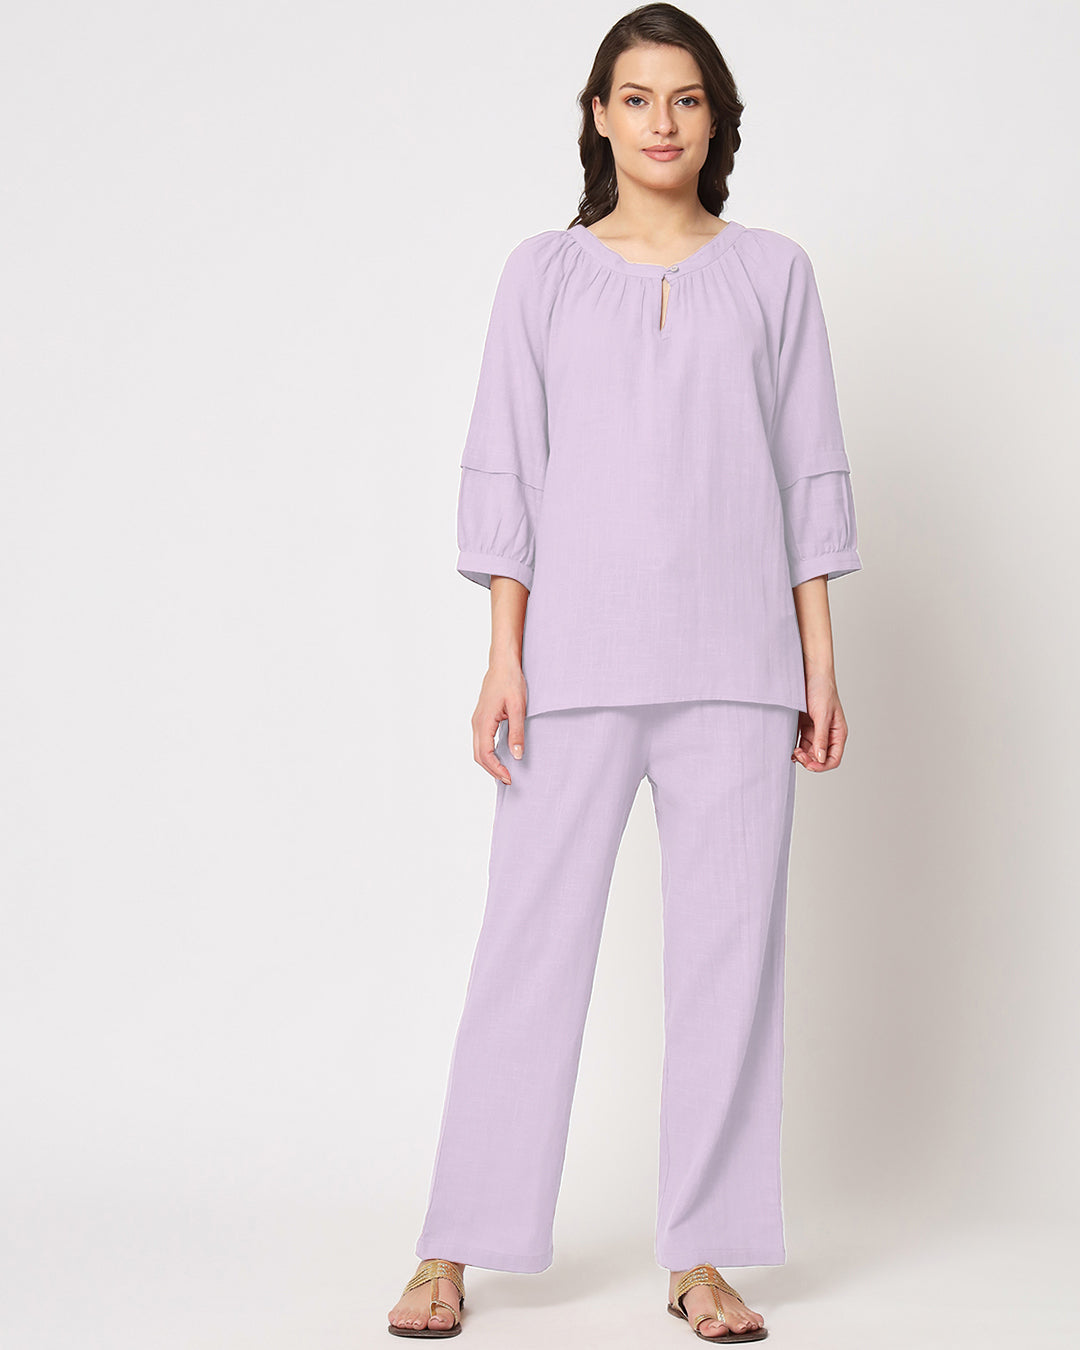 Lilac Button Neck Solid Top (Without Bottoms)